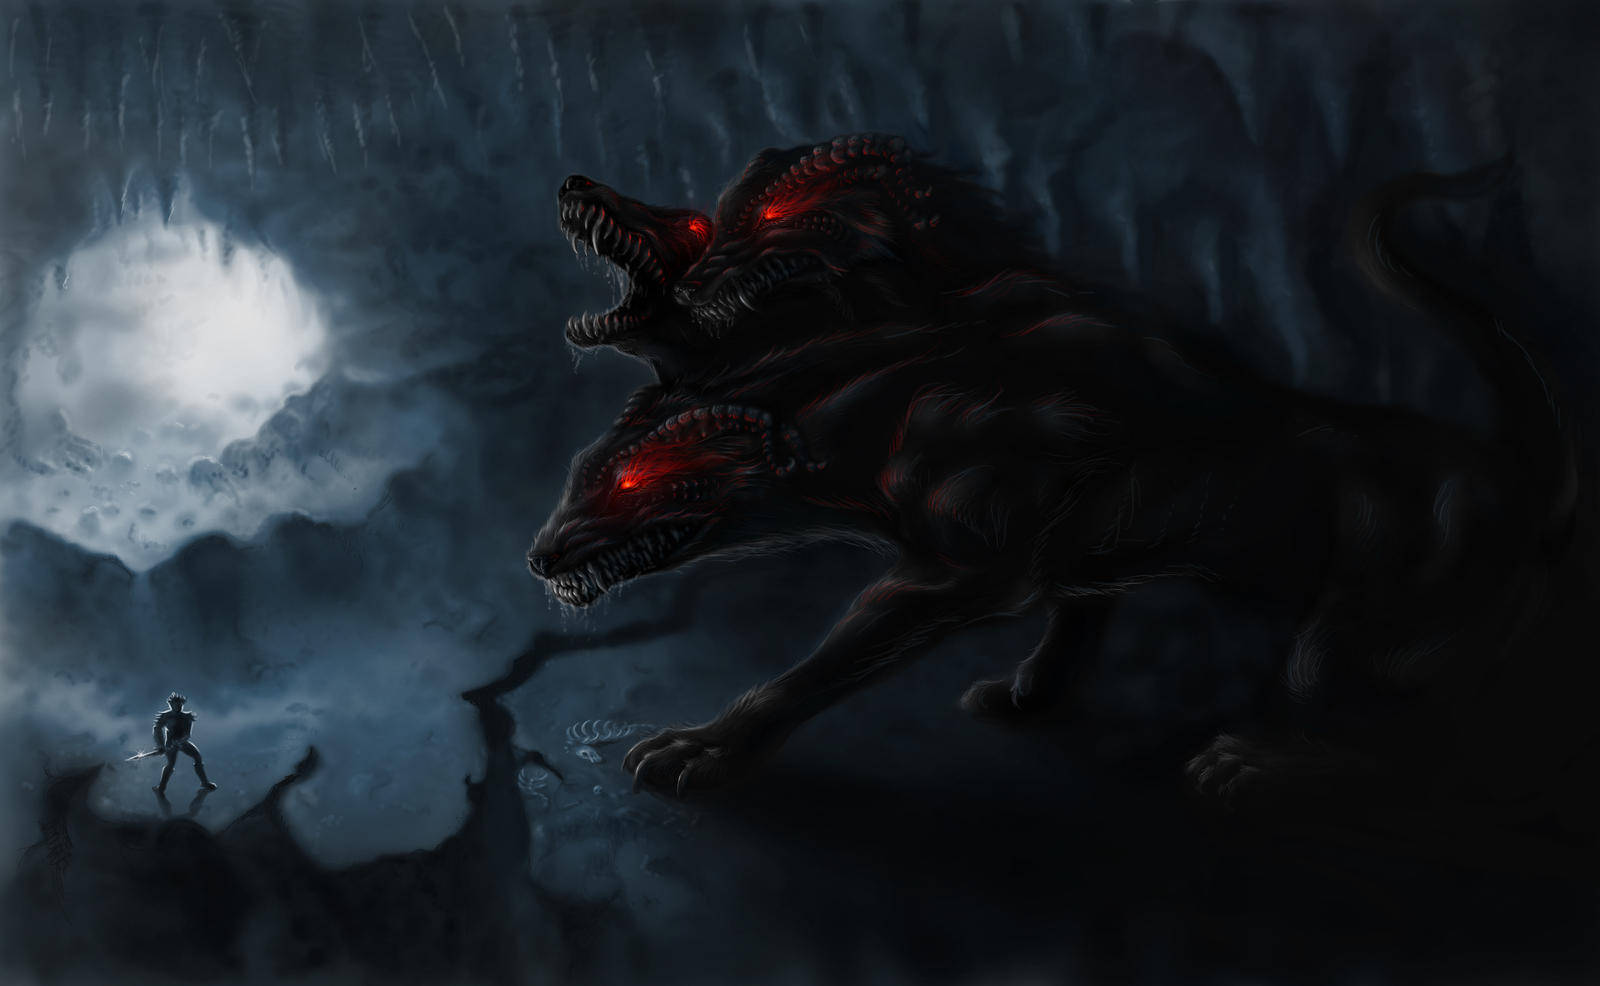 Cerberus - The Fearsome Guardian Of Hades